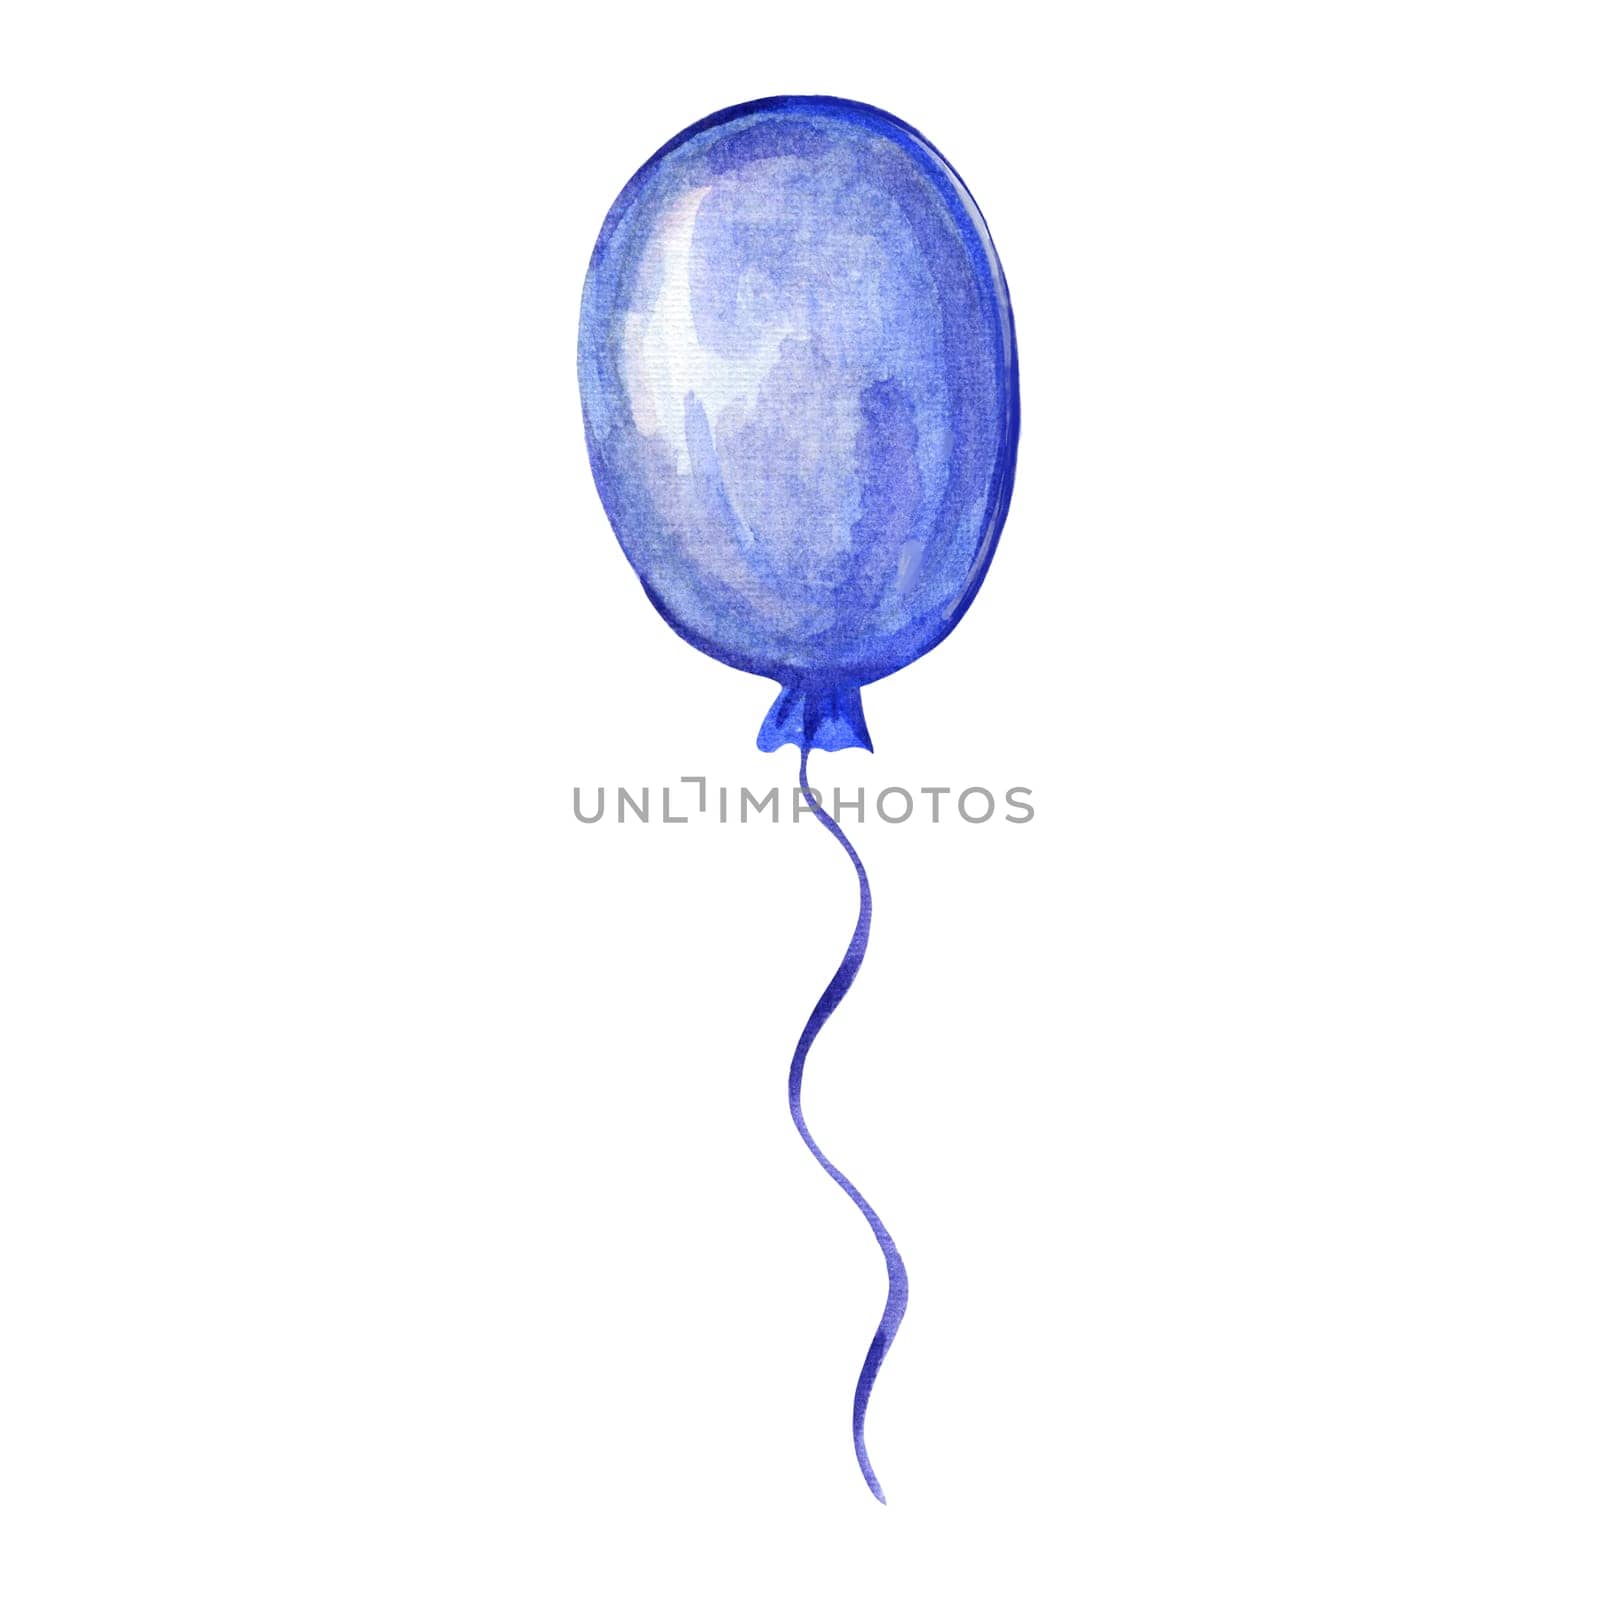 Blue balloon on a white background. Hand-drawn watercolor illustration.